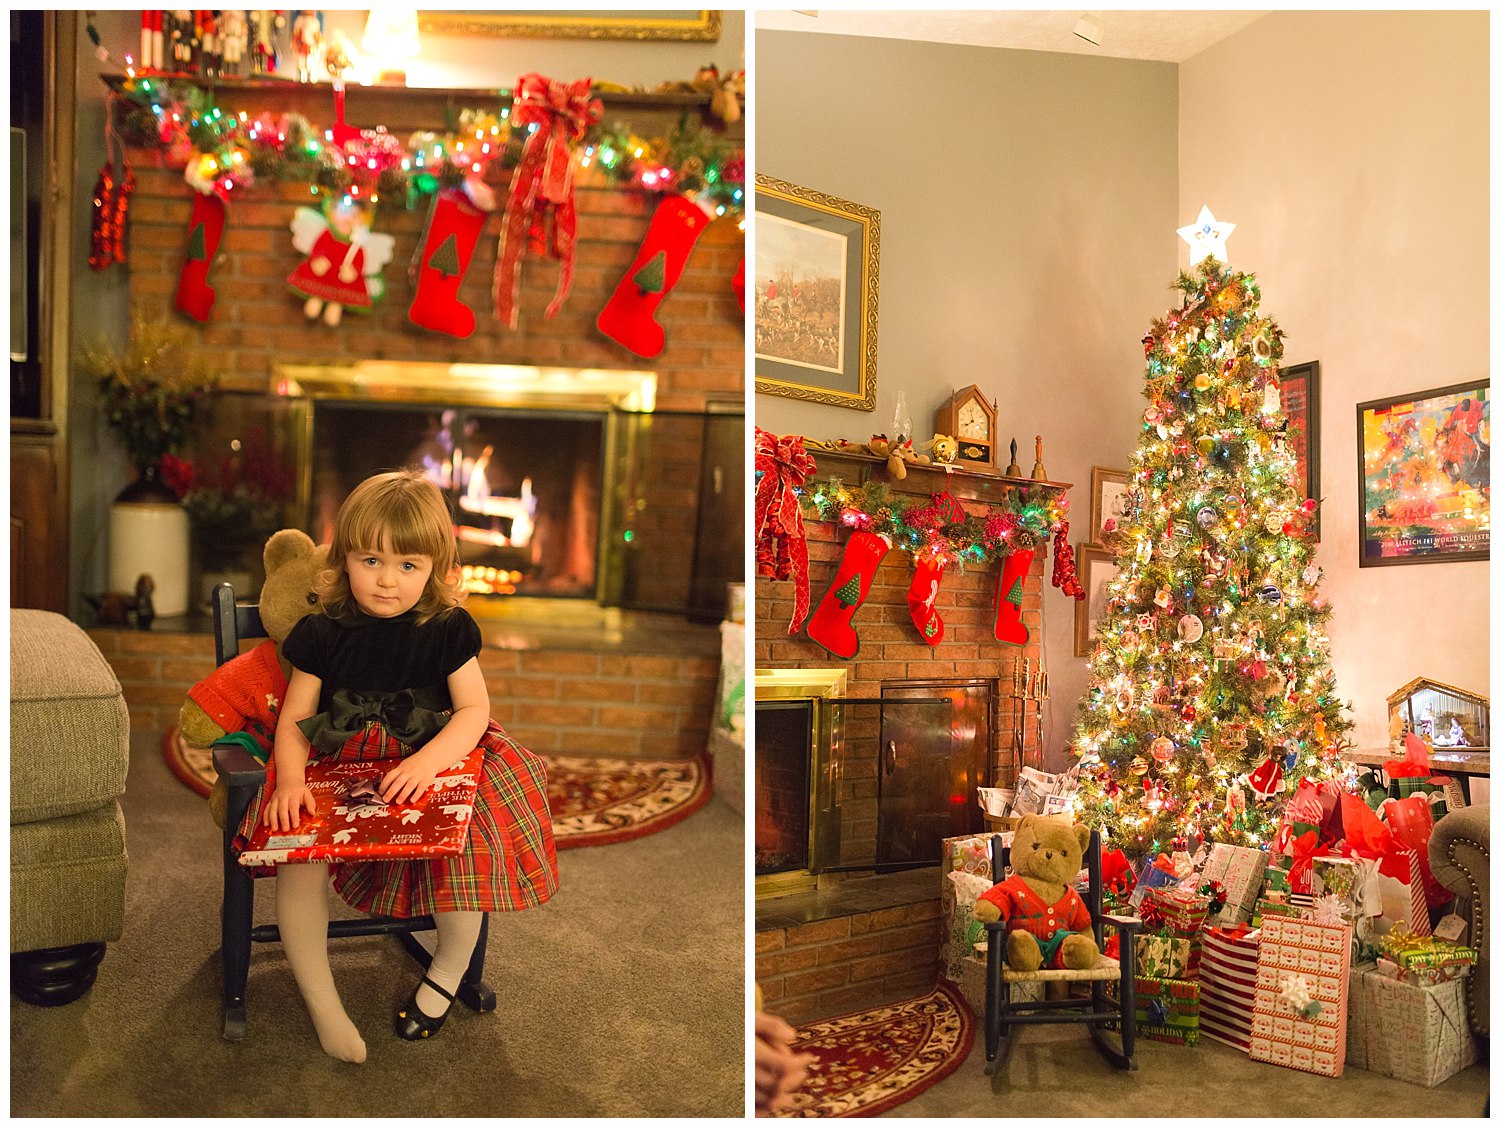 traditional Christmas Eve photos with little girl in rocking chair, fireplace, Christmas tree